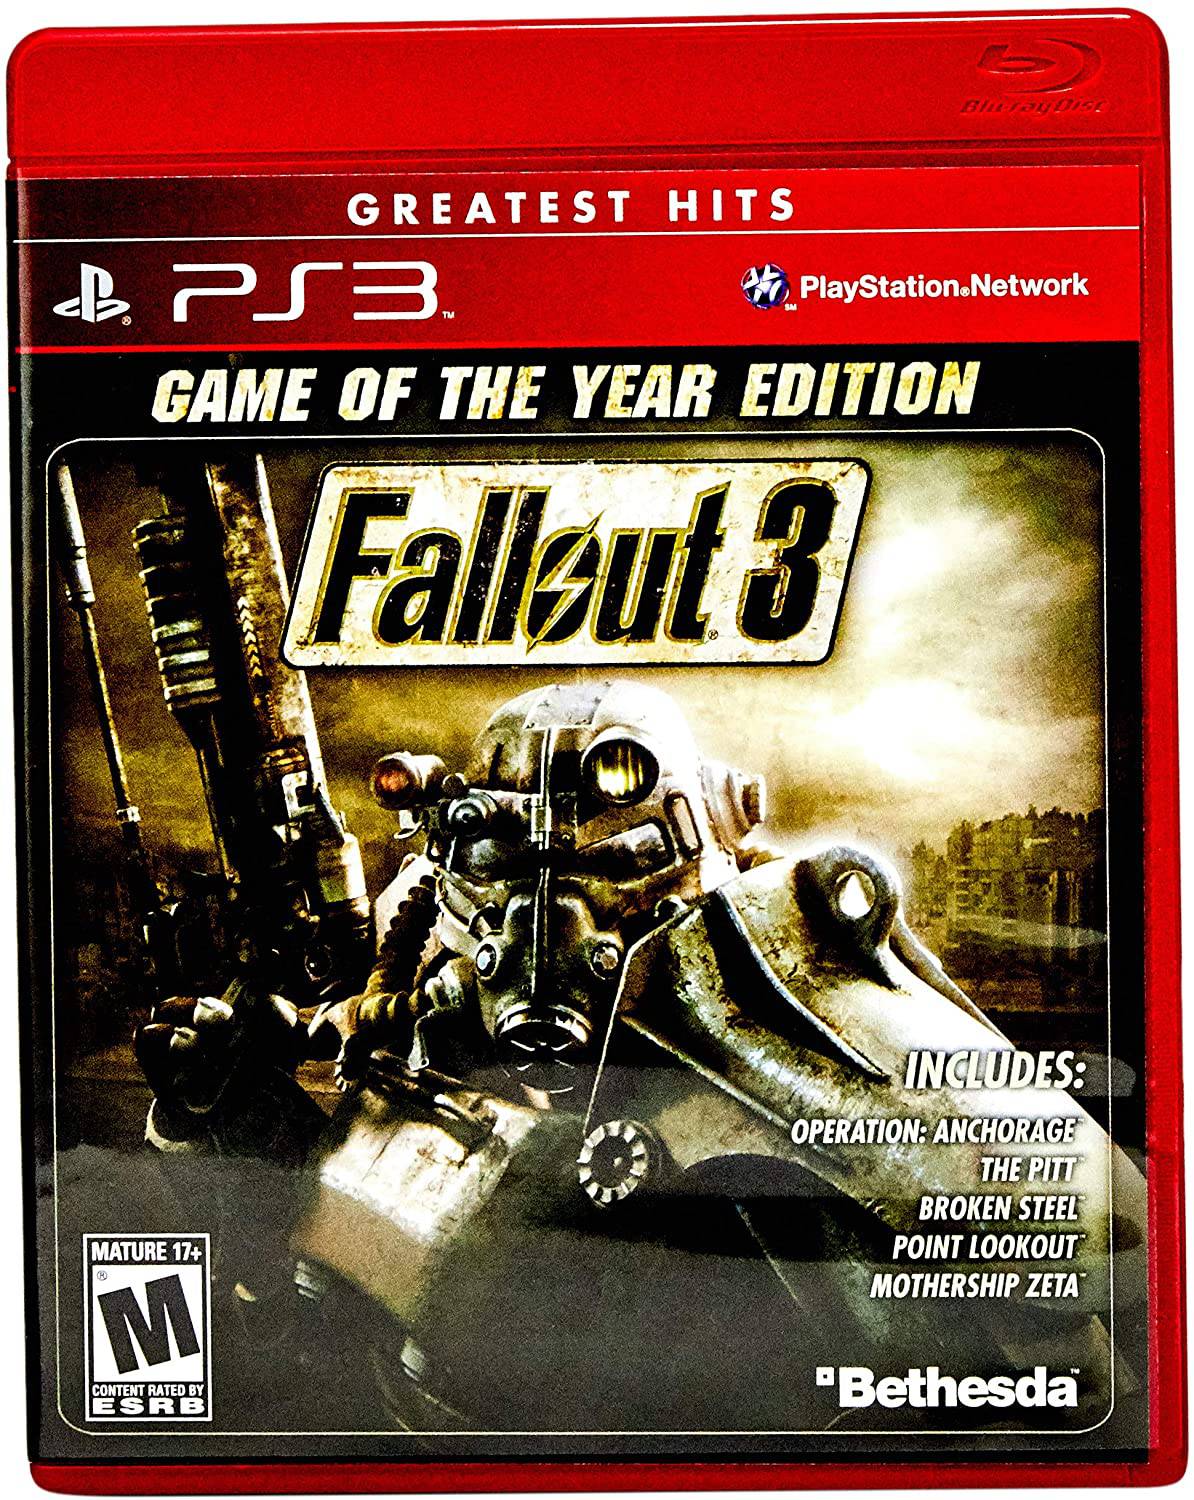 Fallout 3 - Game of the Year Edition (Greatest Hits) King Gaming